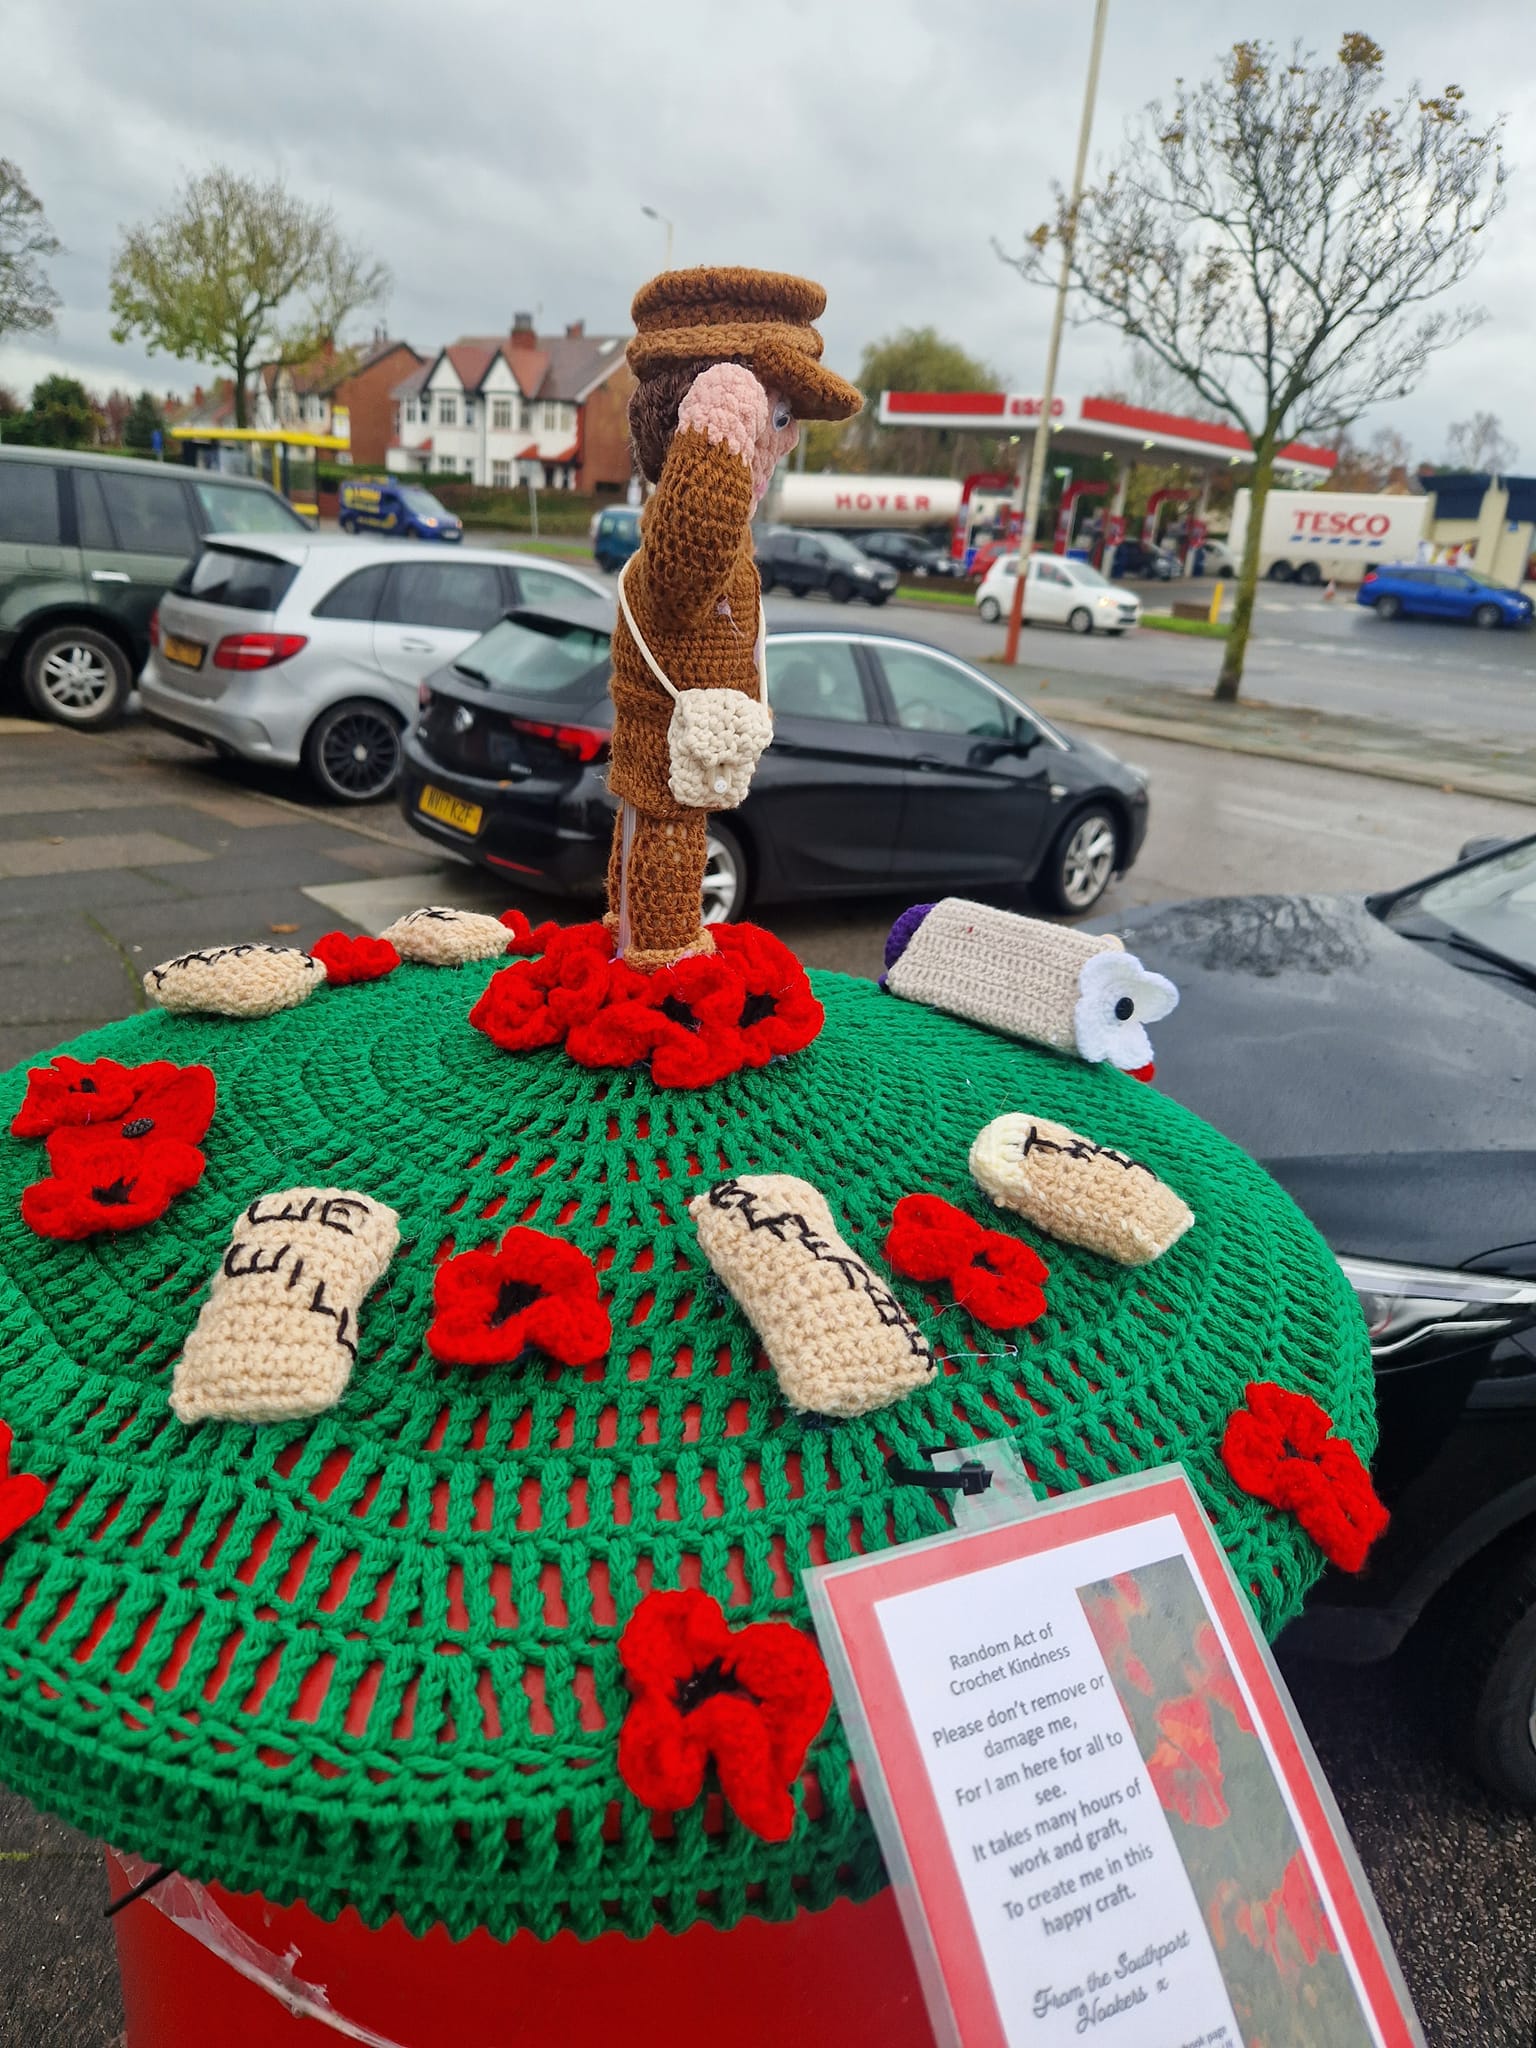 People in Southport are loving the new Remembrance themed toppers which have appeared in the town. The beautiful crochet work is the work of the new Southport Hookers group, whose members have been creating some really eye-catching work locally. Their latest work has seen some moving Remembrance postbox toppers in Churchtown, Crossens and Banks dedicated to those who have served their countries, ahead of the Remembrance services taking place in the town this weekend. Read More: Southport Remembrance details revealed as public invited to support veterans A Southport Hookers spokesperson said: “We love them! We have been planning the Remembrance toppers since September. “It has been a real team effort. Each topper has been worked on by at least five of our members. “We have played to each others’ strengths and have learnt a few new skills along the way. “Hopefully next year we will be able to go bigger and better! “We have been overwhelmed by the reaction to our toppers, we have had so many lovely messages and knowing that they raise a smile or two really keeps us going. “The postboxes we have chosen to cover are located near to where our members live. “So if you can see a postbox topper it means that there is a Southport Hooker nearby. “If you are interested in learning to crochet or if you are already an avid fan and would like to meet like-minded people, please contact us via our Southport Hookers Facebook page. “We do more than just postbox toppers and would love to welcome new members.” The postbox toppers have wowed local people. Speaking on the Southport Hookers Facebook page, Chris Watkinson said: “They are brilliant.” Debra Moore said: “Love the one in Crossens. Thank you so much.” Meryl Birchall said: “Love the one in Banks, thank you so much, you are so talented.” Bev Alderson said: “Beautiful, lest we forget.” More acts of subterfuge are being planned in the coming days, including outside a well-known care home in Southport. Southport Hookers members meet every Sunday at a secret location in Southport, with new people invited to get involved. All they need is bags of enthusiasm, bags of knitting and a desire to carry out random acts of kindness across the community. Do you have a story for Stand Up For Southport? Do you need advertising, PR or media support? Please message Andrew Brown via Facebook here or email me at: mediaandrewbrownn@gmail.com 